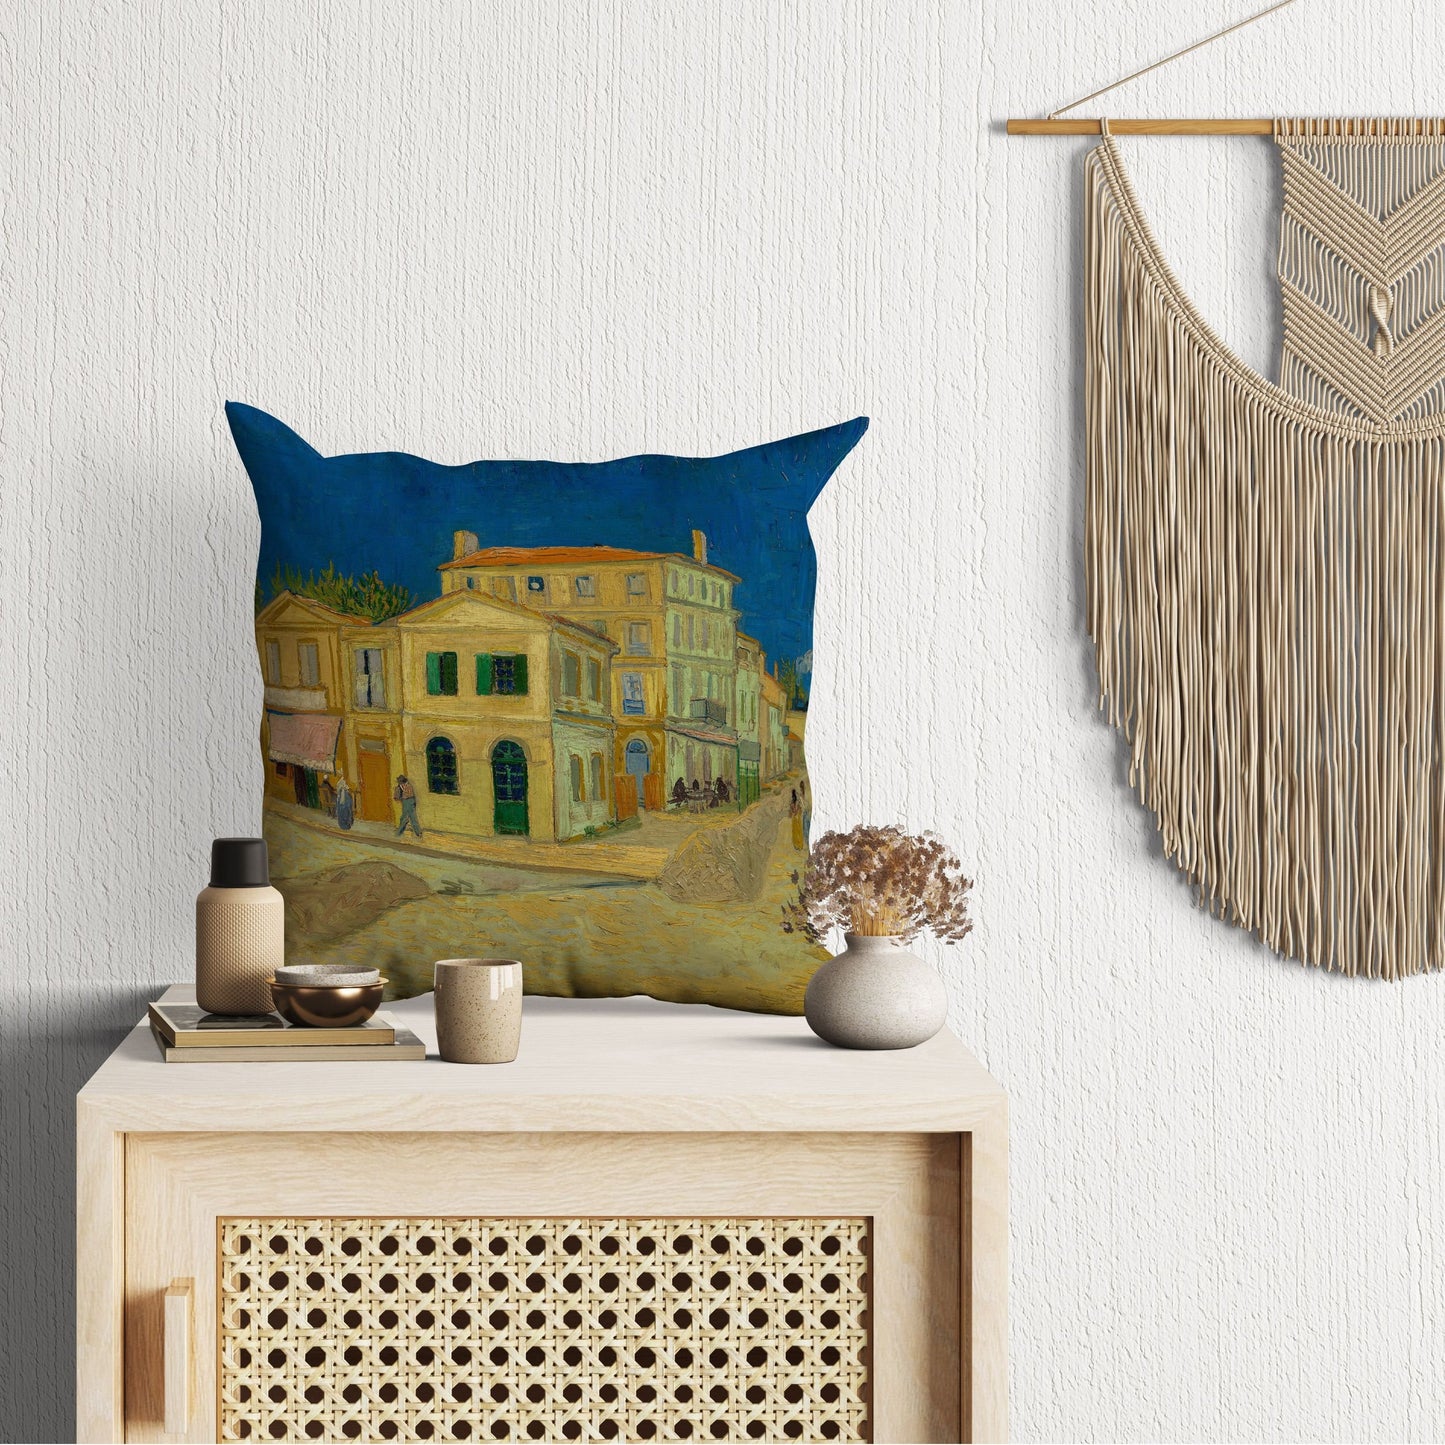 Vincent Van Gogh The Yellow House, Decorative Pillow, Abstract Pillow, Soft Pillow Cases, Blue And Yellow, Modern Pillow, Square Pillow